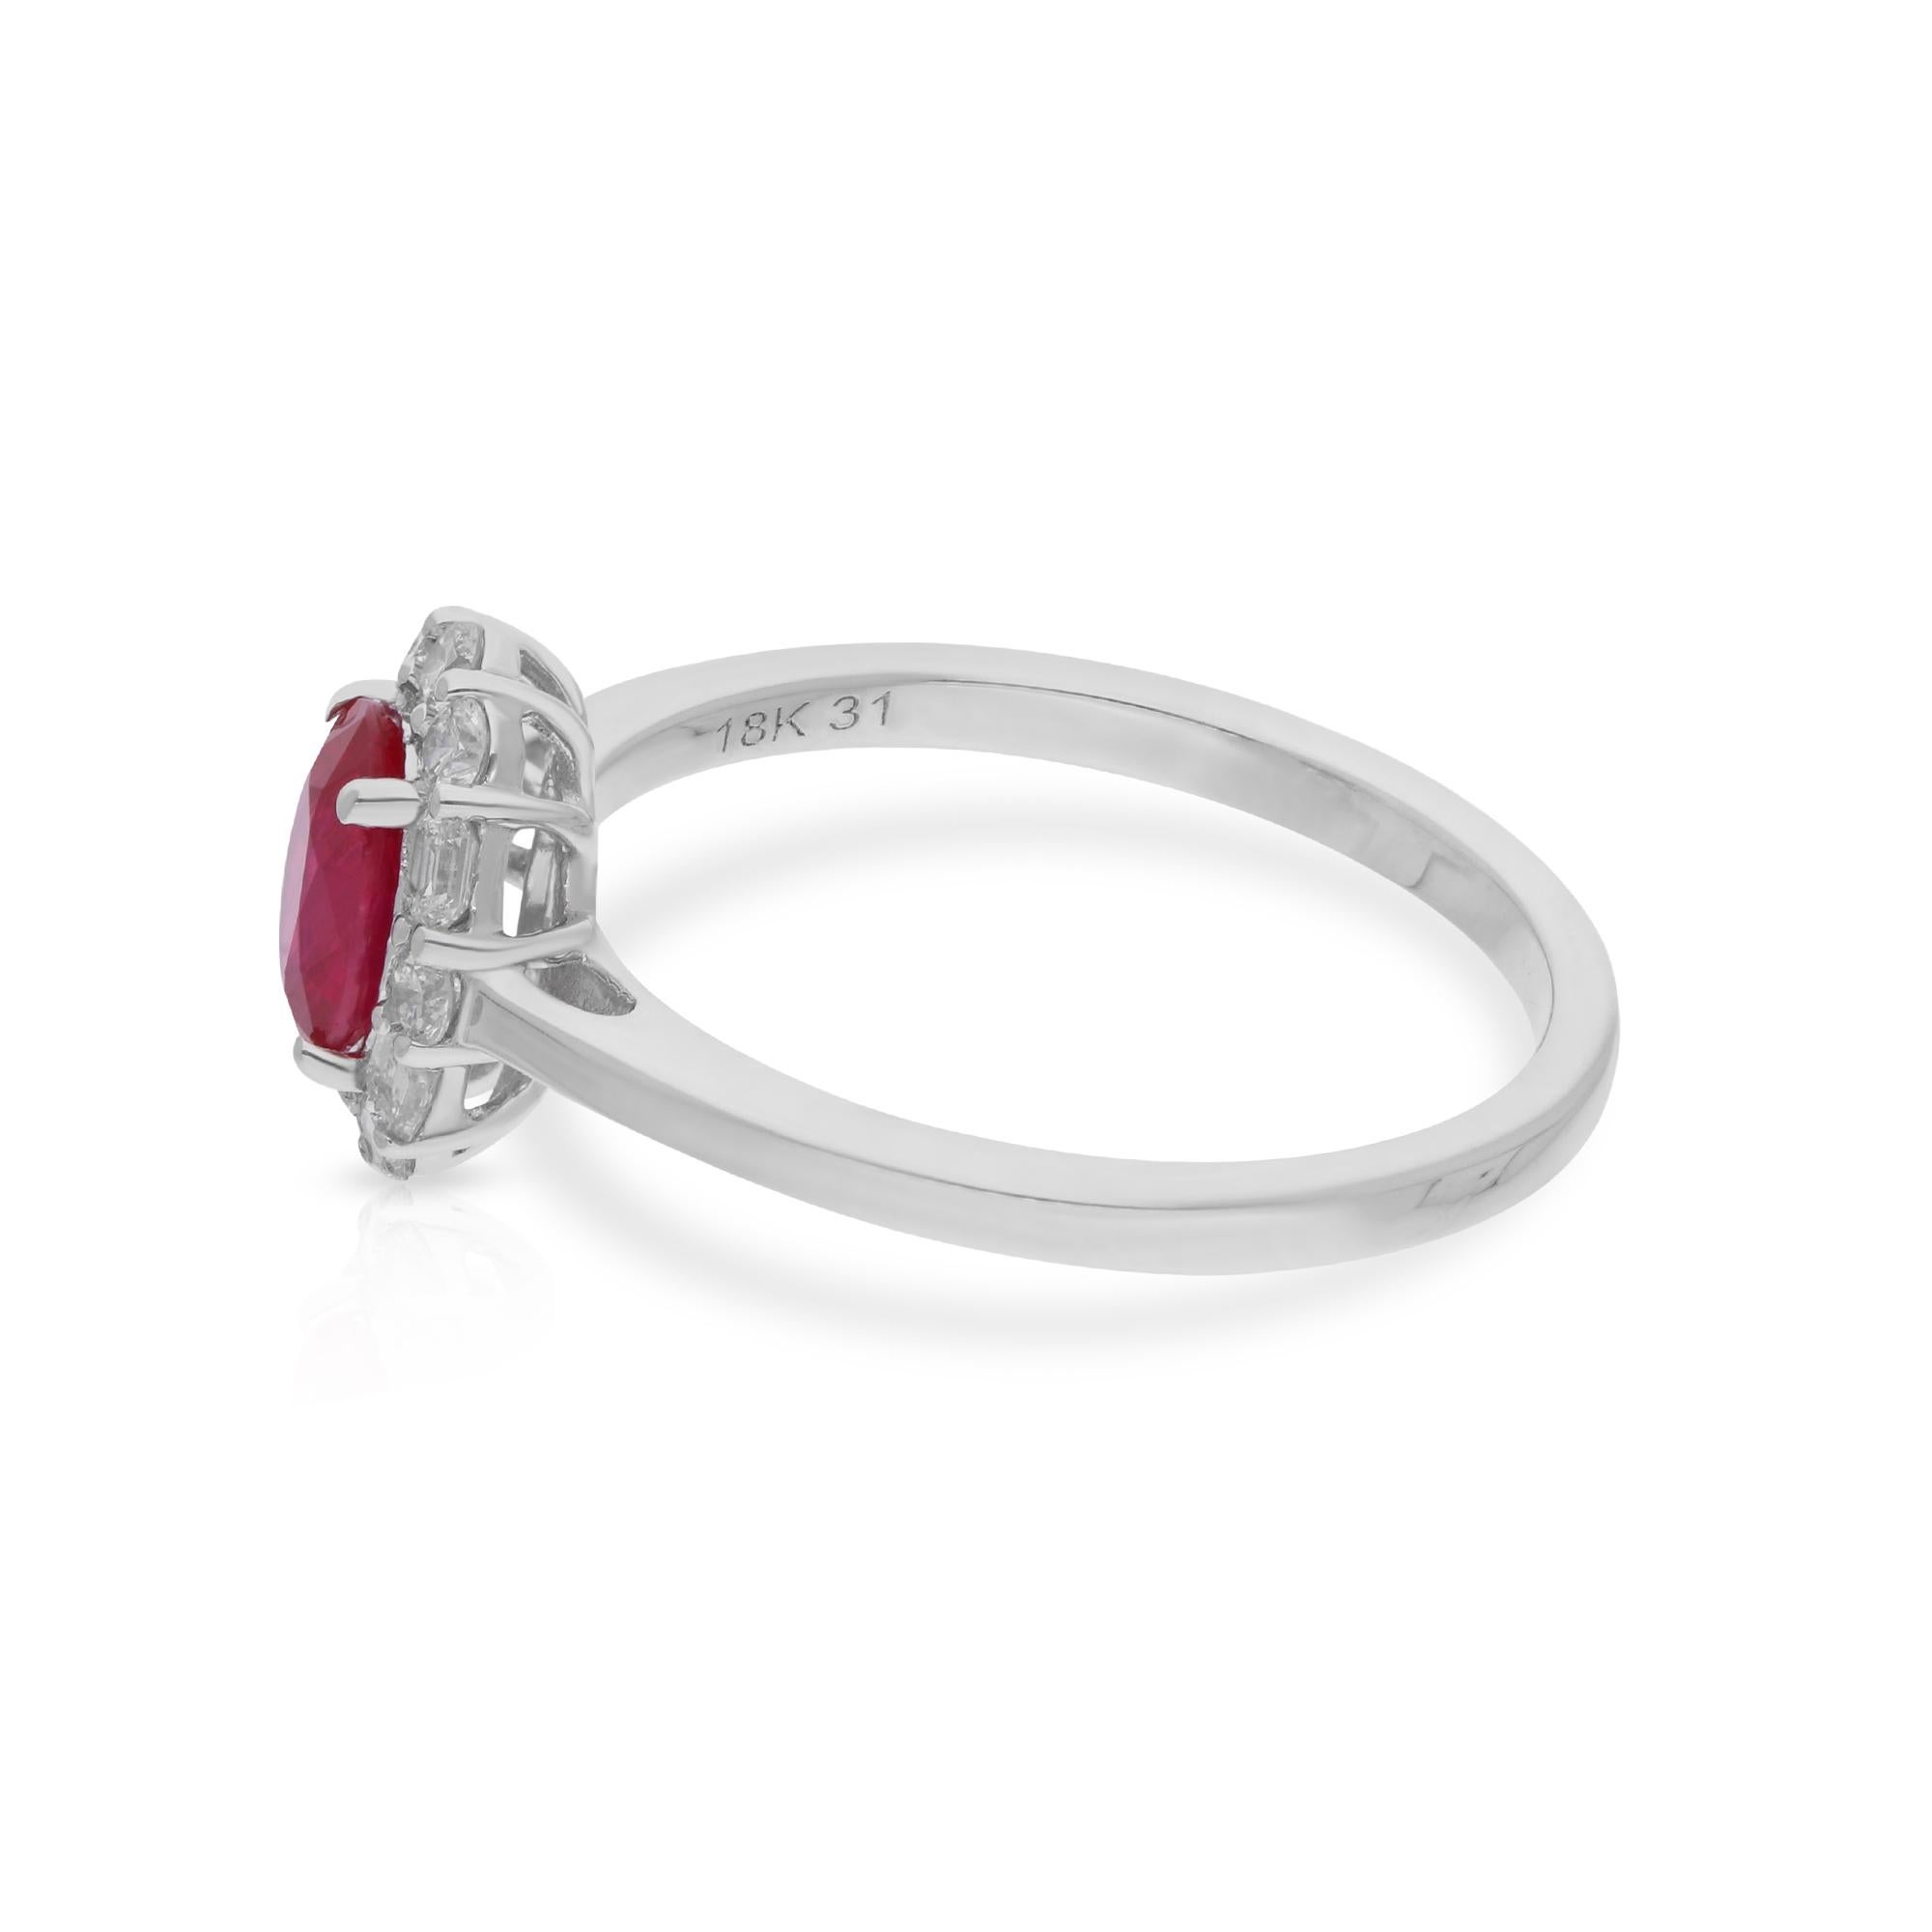 Surrounding the ruby gemstone are dazzling diamonds, meticulously set in lustrous 18 Karat White Gold. Each diamond is carefully selected for its exceptional quality and brilliance, adding a touch of sparkle and luxury to the design. The intricate